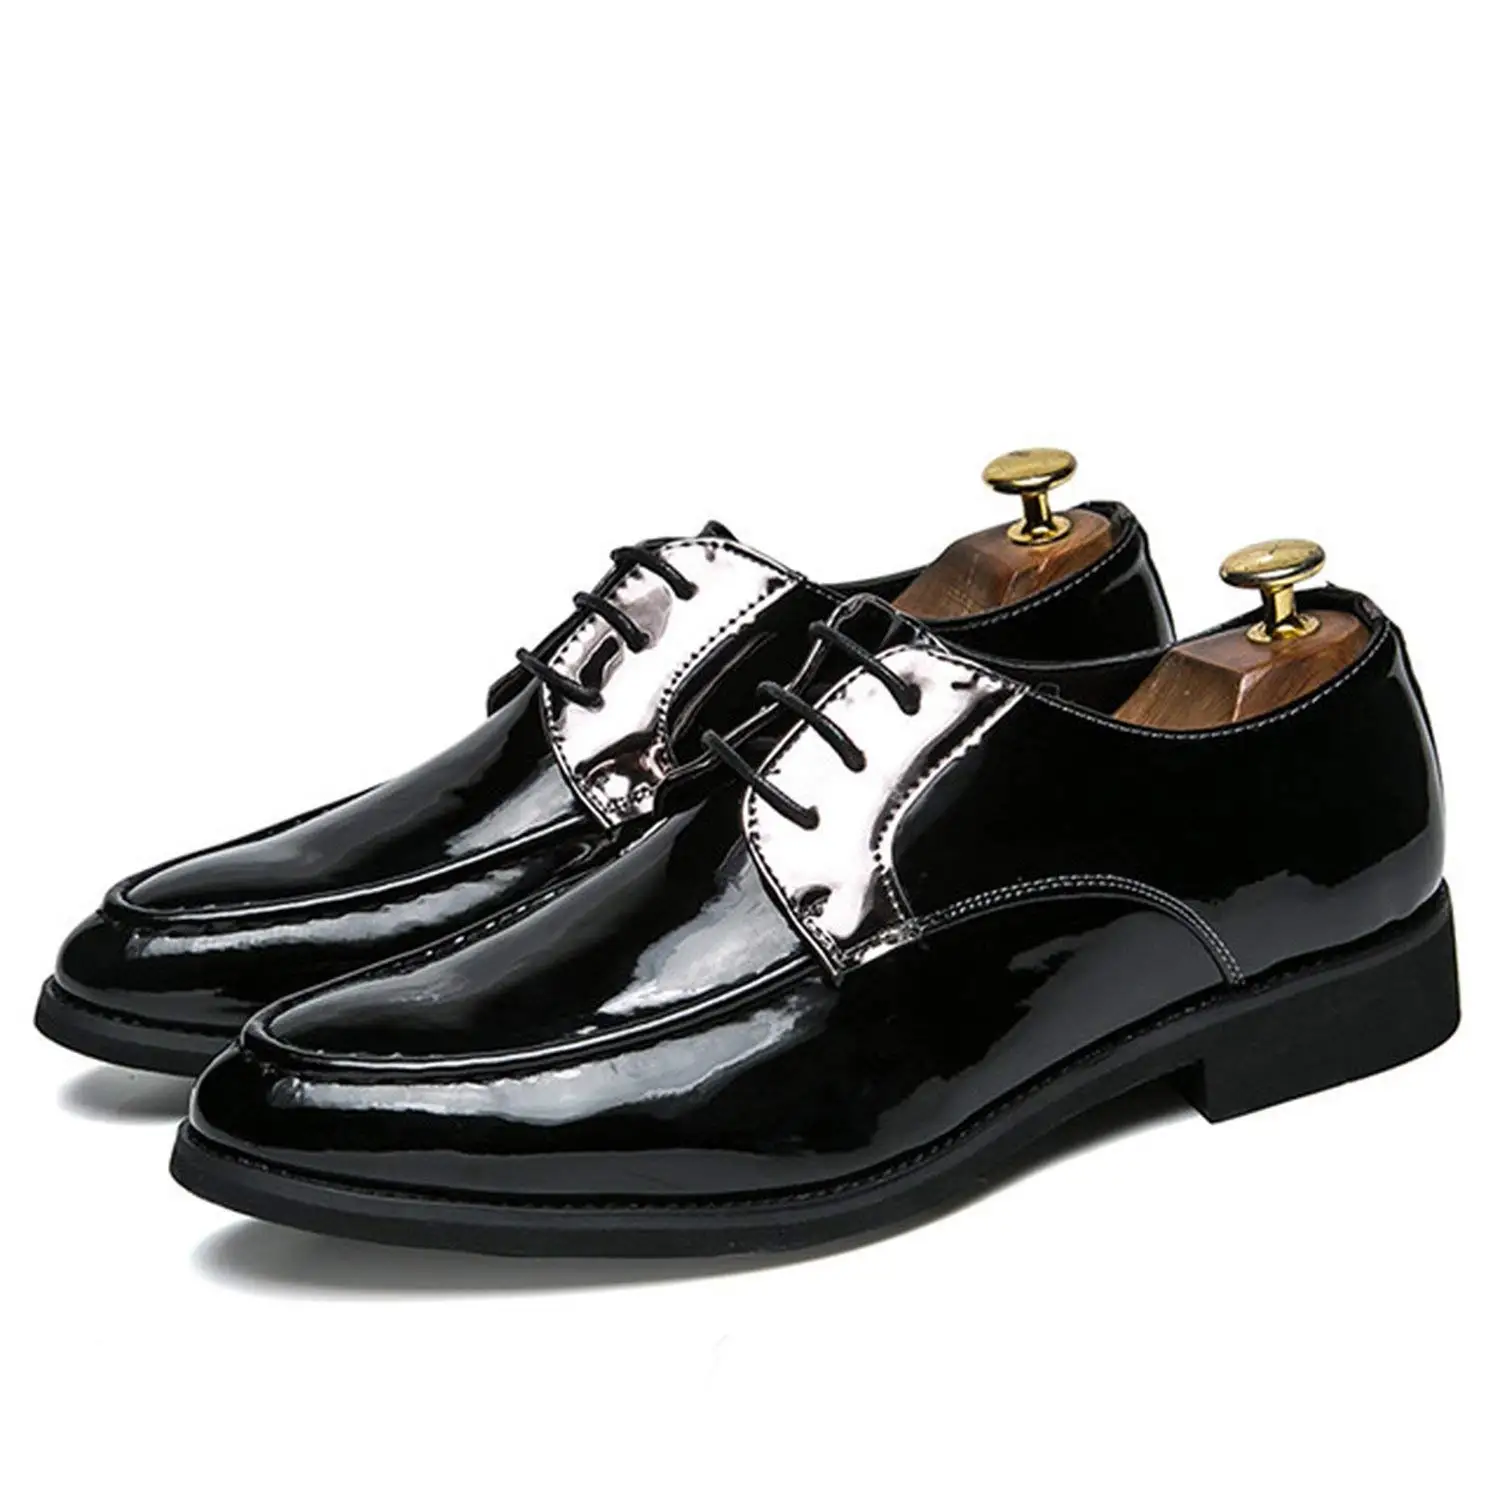 silver and black dress shoes